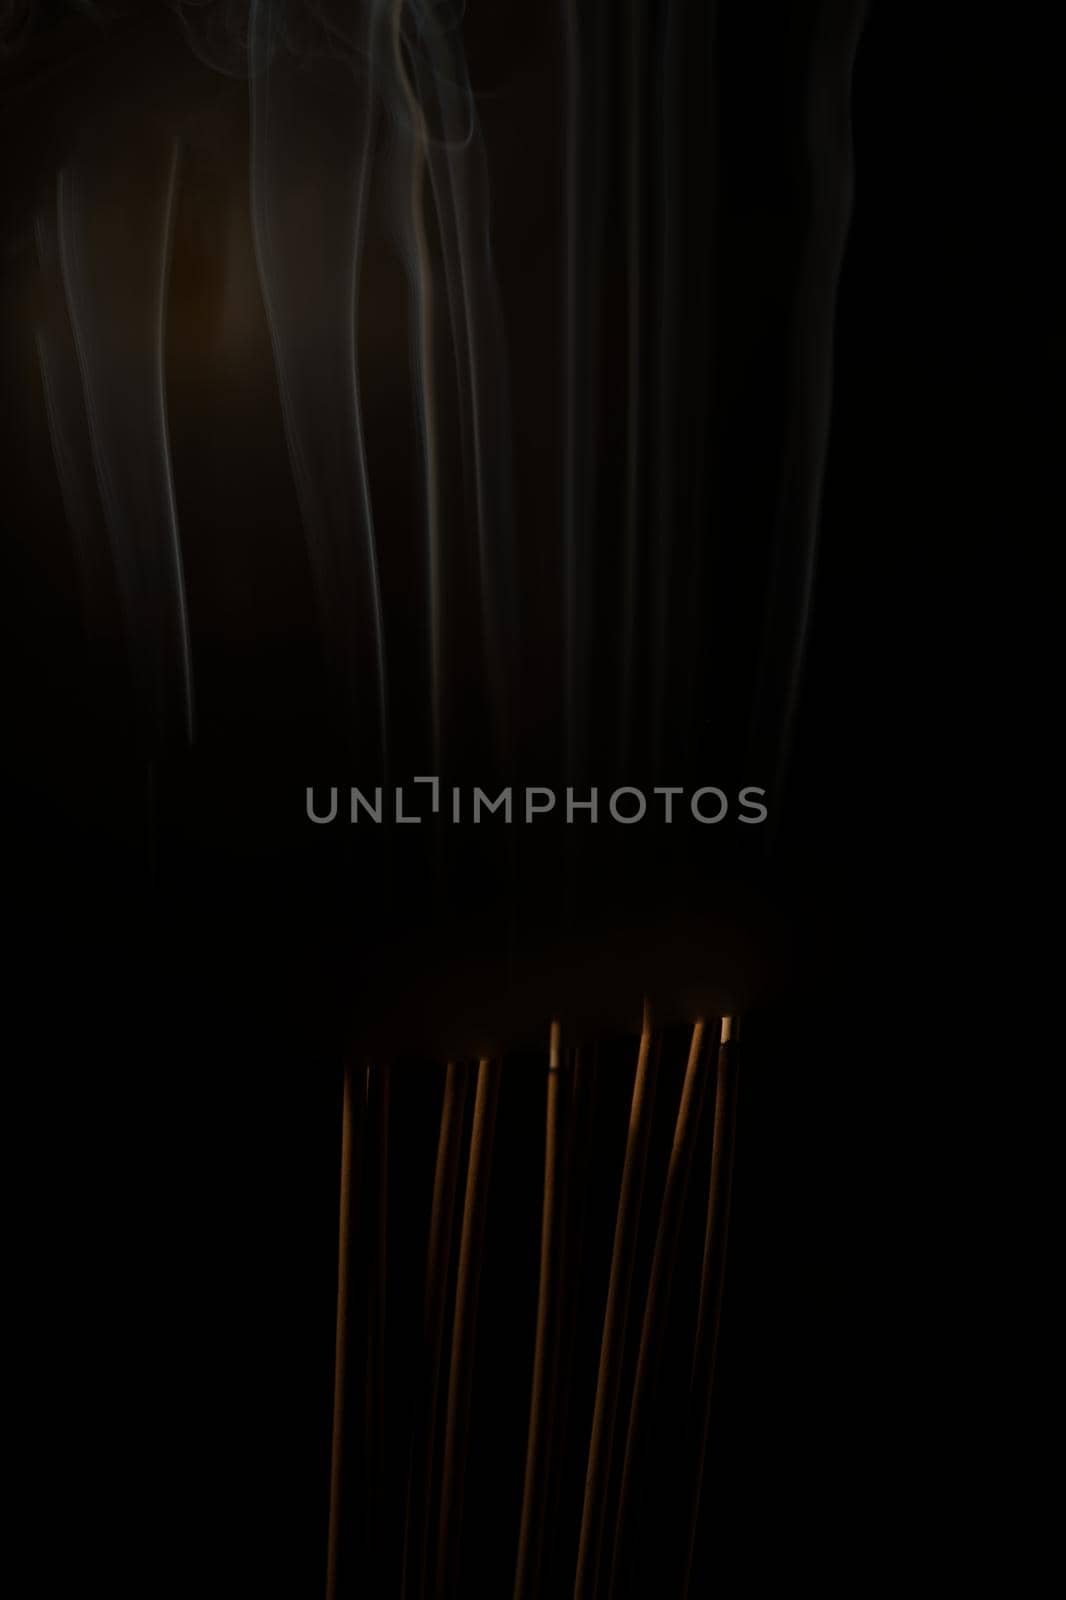 Incense burning incense, white smoke, black background, used as background image Paying homage to the sacred objects of the people of Buddhism according to their beliefs and beliefs. by noppha80